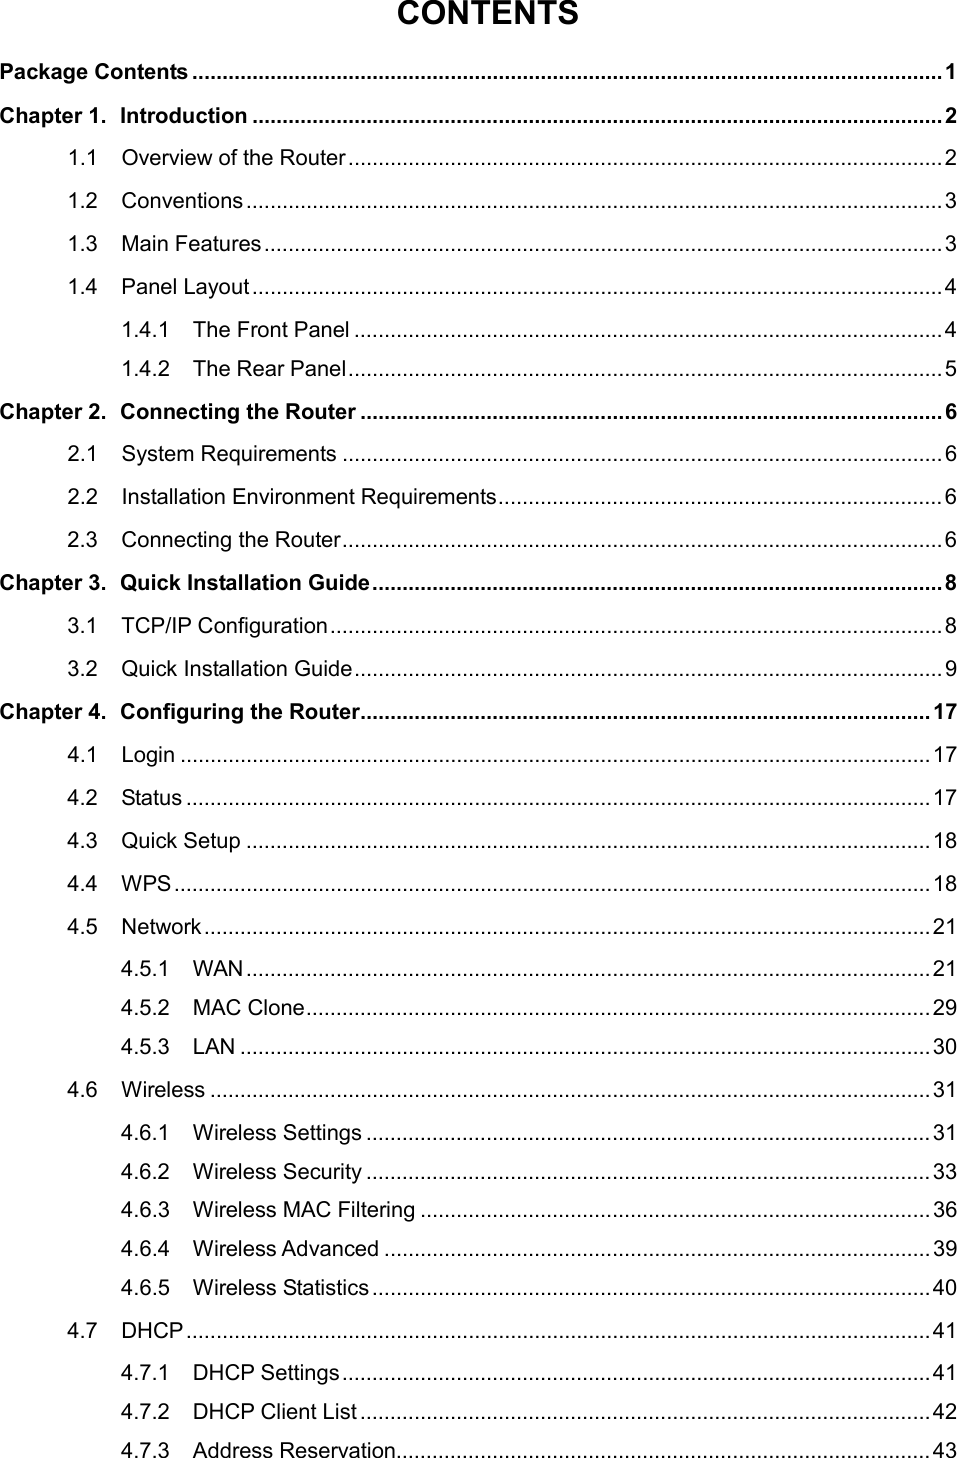  CONTENTS Package Contents ............................................................................................................................. 1 Chapter 1. Introduction ................................................................................................................... 2 1.1 Overview of the Router ................................................................................................... 2 1.2 Conventions .................................................................................................................... 3 1.3 Main Features ................................................................................................................. 3 1.4 Panel Layout ................................................................................................................... 4 1.4.1 The Front Panel .................................................................................................. 4 1.4.2 The Rear Panel ................................................................................................... 5 Chapter 2. Connecting the Router ................................................................................................. 6 2.1 System Requirements .................................................................................................... 6 2.2 Installation Environment Requirements .......................................................................... 6 2.3 Connecting the Router .................................................................................................... 6 Chapter 3. Quick Installation Guide ............................................................................................... 8 3.1 TCP/IP Configuration ...................................................................................................... 8 3.2 Quick Installation Guide .................................................................................................. 9 Chapter 4. Configuring the Router ............................................................................................... 17 4.1 Login ............................................................................................................................. 17 4.2 Status ............................................................................................................................ 17 4.3 Quick Setup .................................................................................................................. 18 4.4 WPS .............................................................................................................................. 18 4.5 Network ......................................................................................................................... 21 4.5.1 WAN .................................................................................................................. 21 4.5.2 MAC Clone ........................................................................................................ 29 4.5.3 LAN ................................................................................................................... 30 4.6 Wireless ........................................................................................................................ 31 4.6.1 Wireless Settings .............................................................................................. 31 4.6.2 Wireless Security .............................................................................................. 33 4.6.3 Wireless MAC Filtering ..................................................................................... 36 4.6.4 Wireless Advanced ........................................................................................... 39 4.6.5 Wireless Statistics ............................................................................................. 40 4.7 DHCP ............................................................................................................................ 41 4.7.1 DHCP Settings .................................................................................................. 41 4.7.2 DHCP Client List ............................................................................................... 42 4.7.3 Address Reservation......................................................................................... 43  